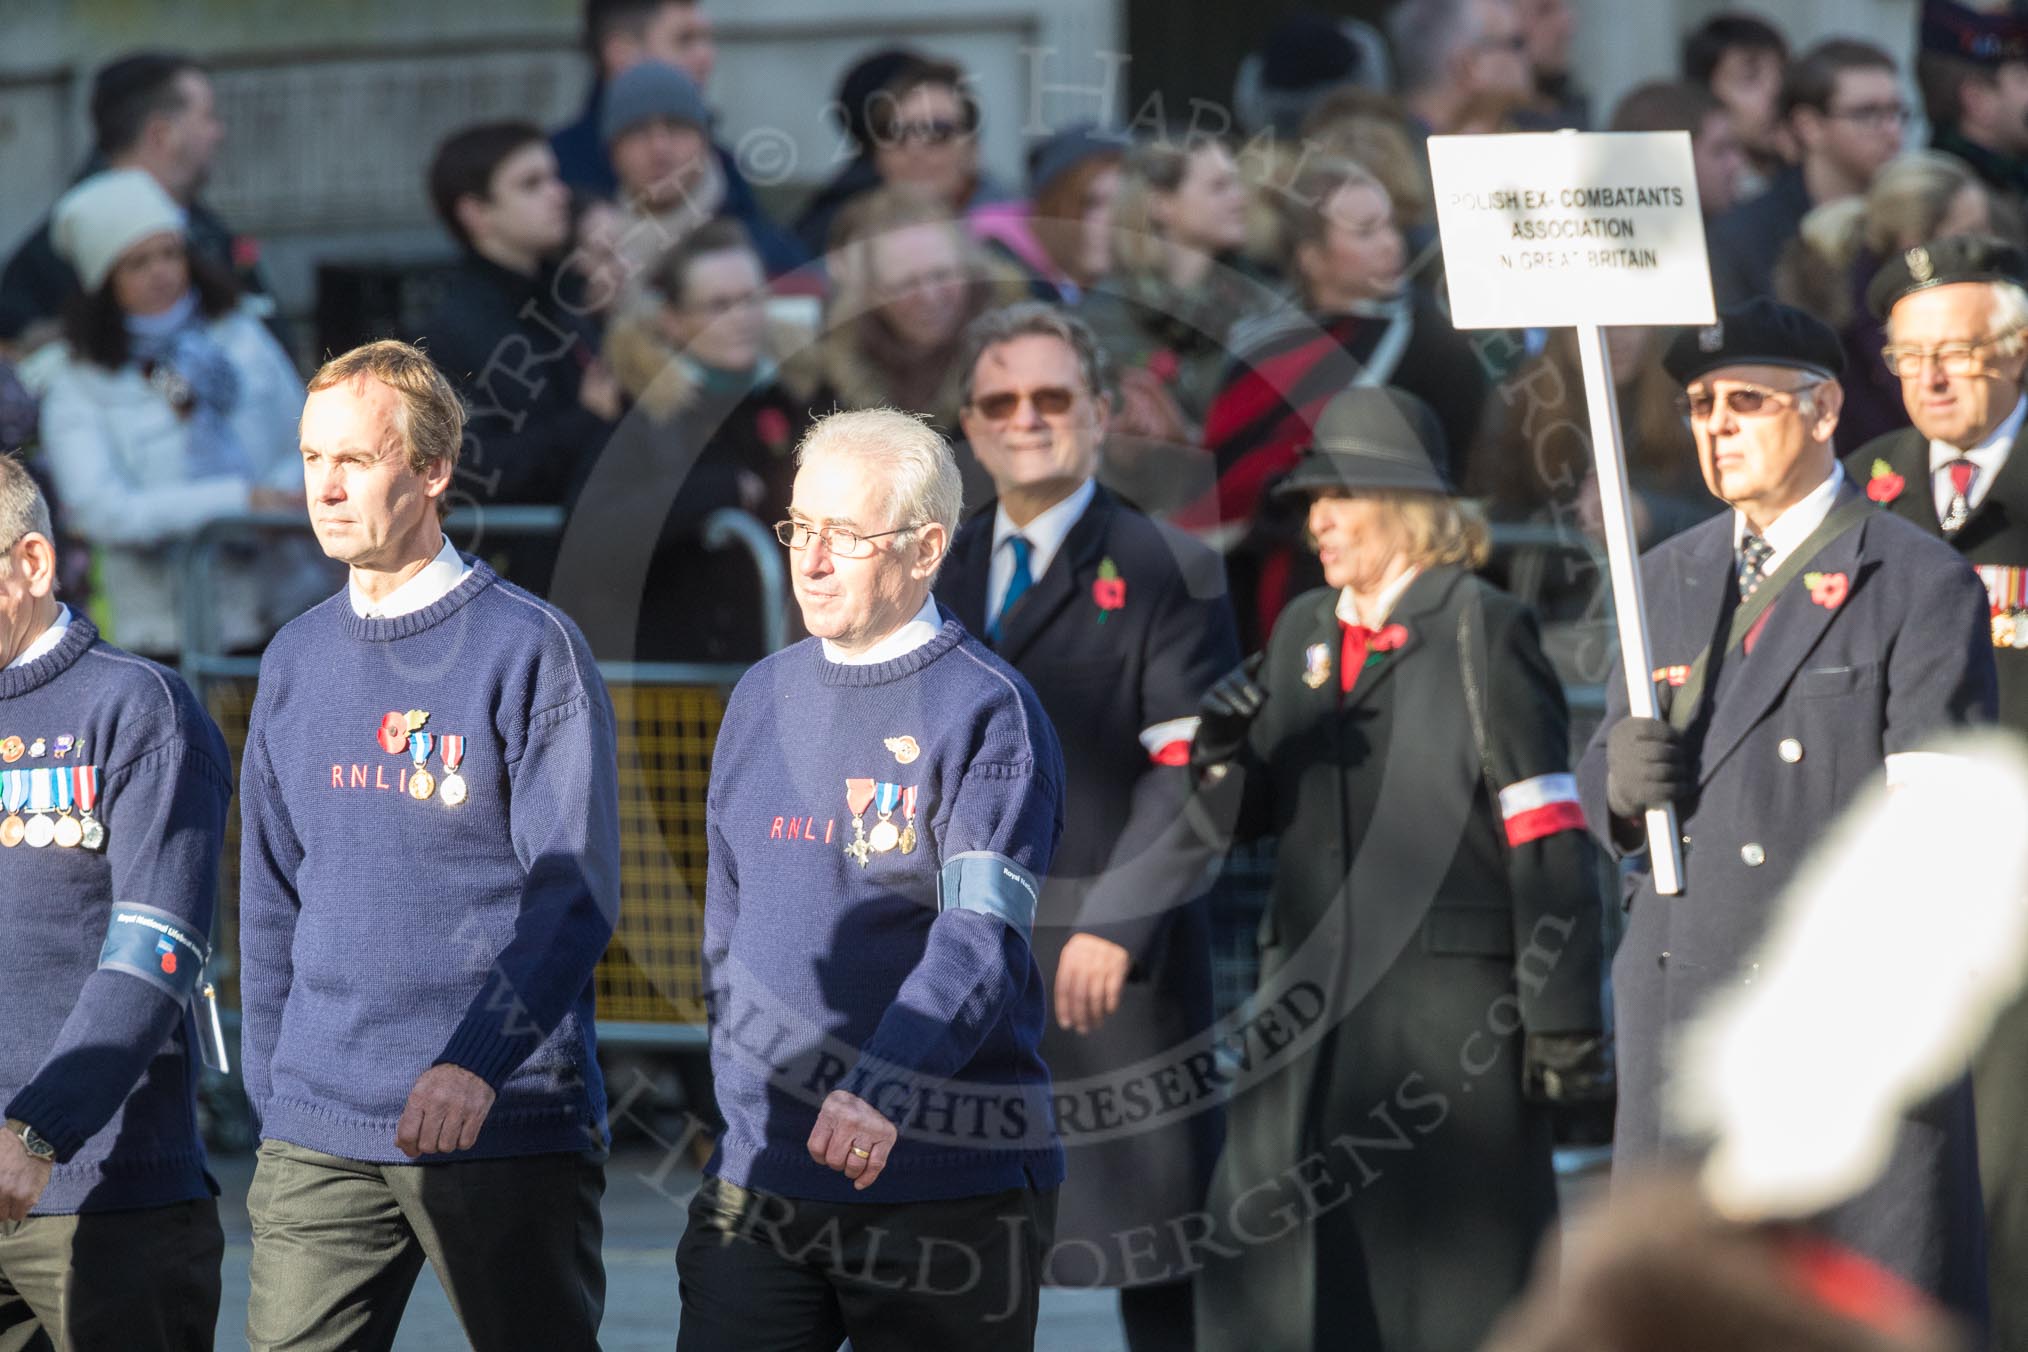 March Past, Remembrance Sunday at the Cenotaph 2016: M42 SPPW - Friends of Polish Veterans Association.
Cenotaph, Whitehall, London SW1,
London,
Greater London,
United Kingdom,
on 13 November 2016 at 13:19, image #2959